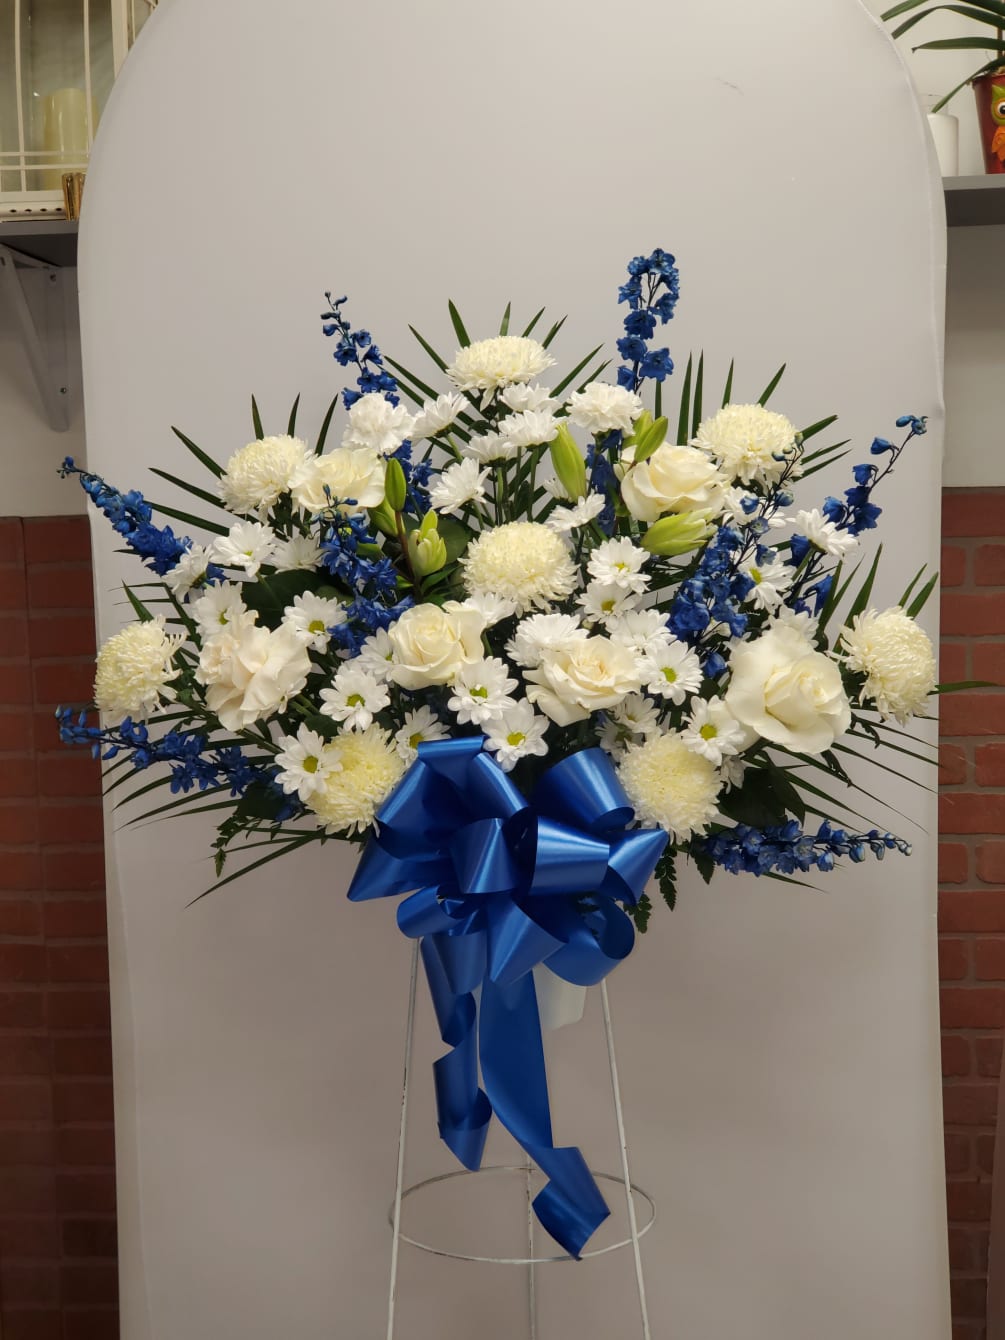 This Blue and White standing basket includes, 8 white mums, 8 blue